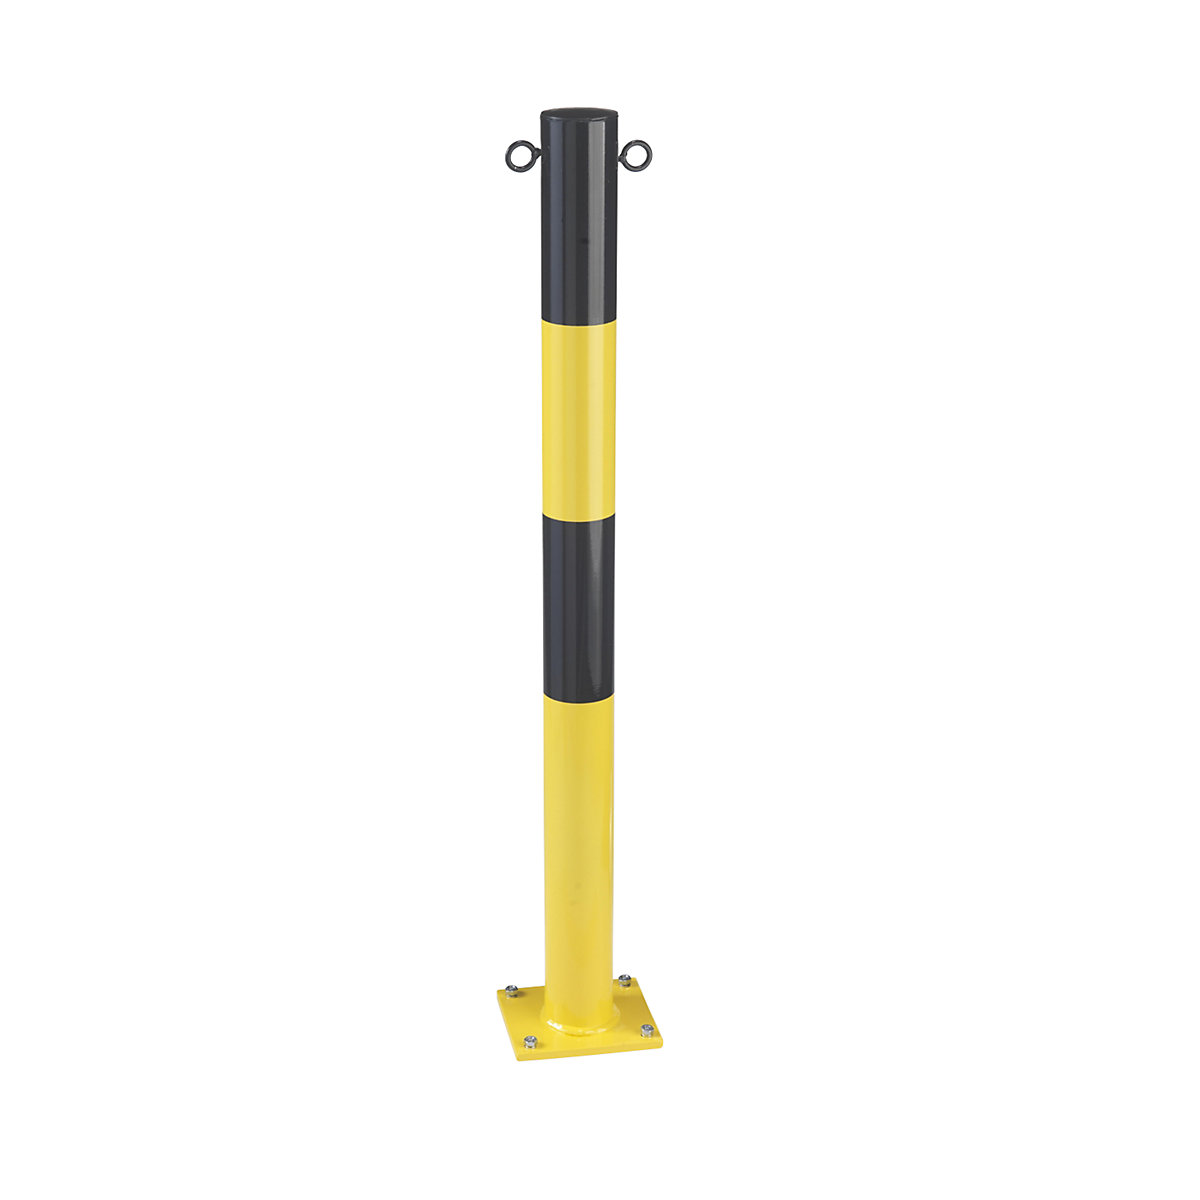 Barrier post made of tubular steel, for bolting in place, Ø 76 mm, yellow / black, zinc plated and painted-4